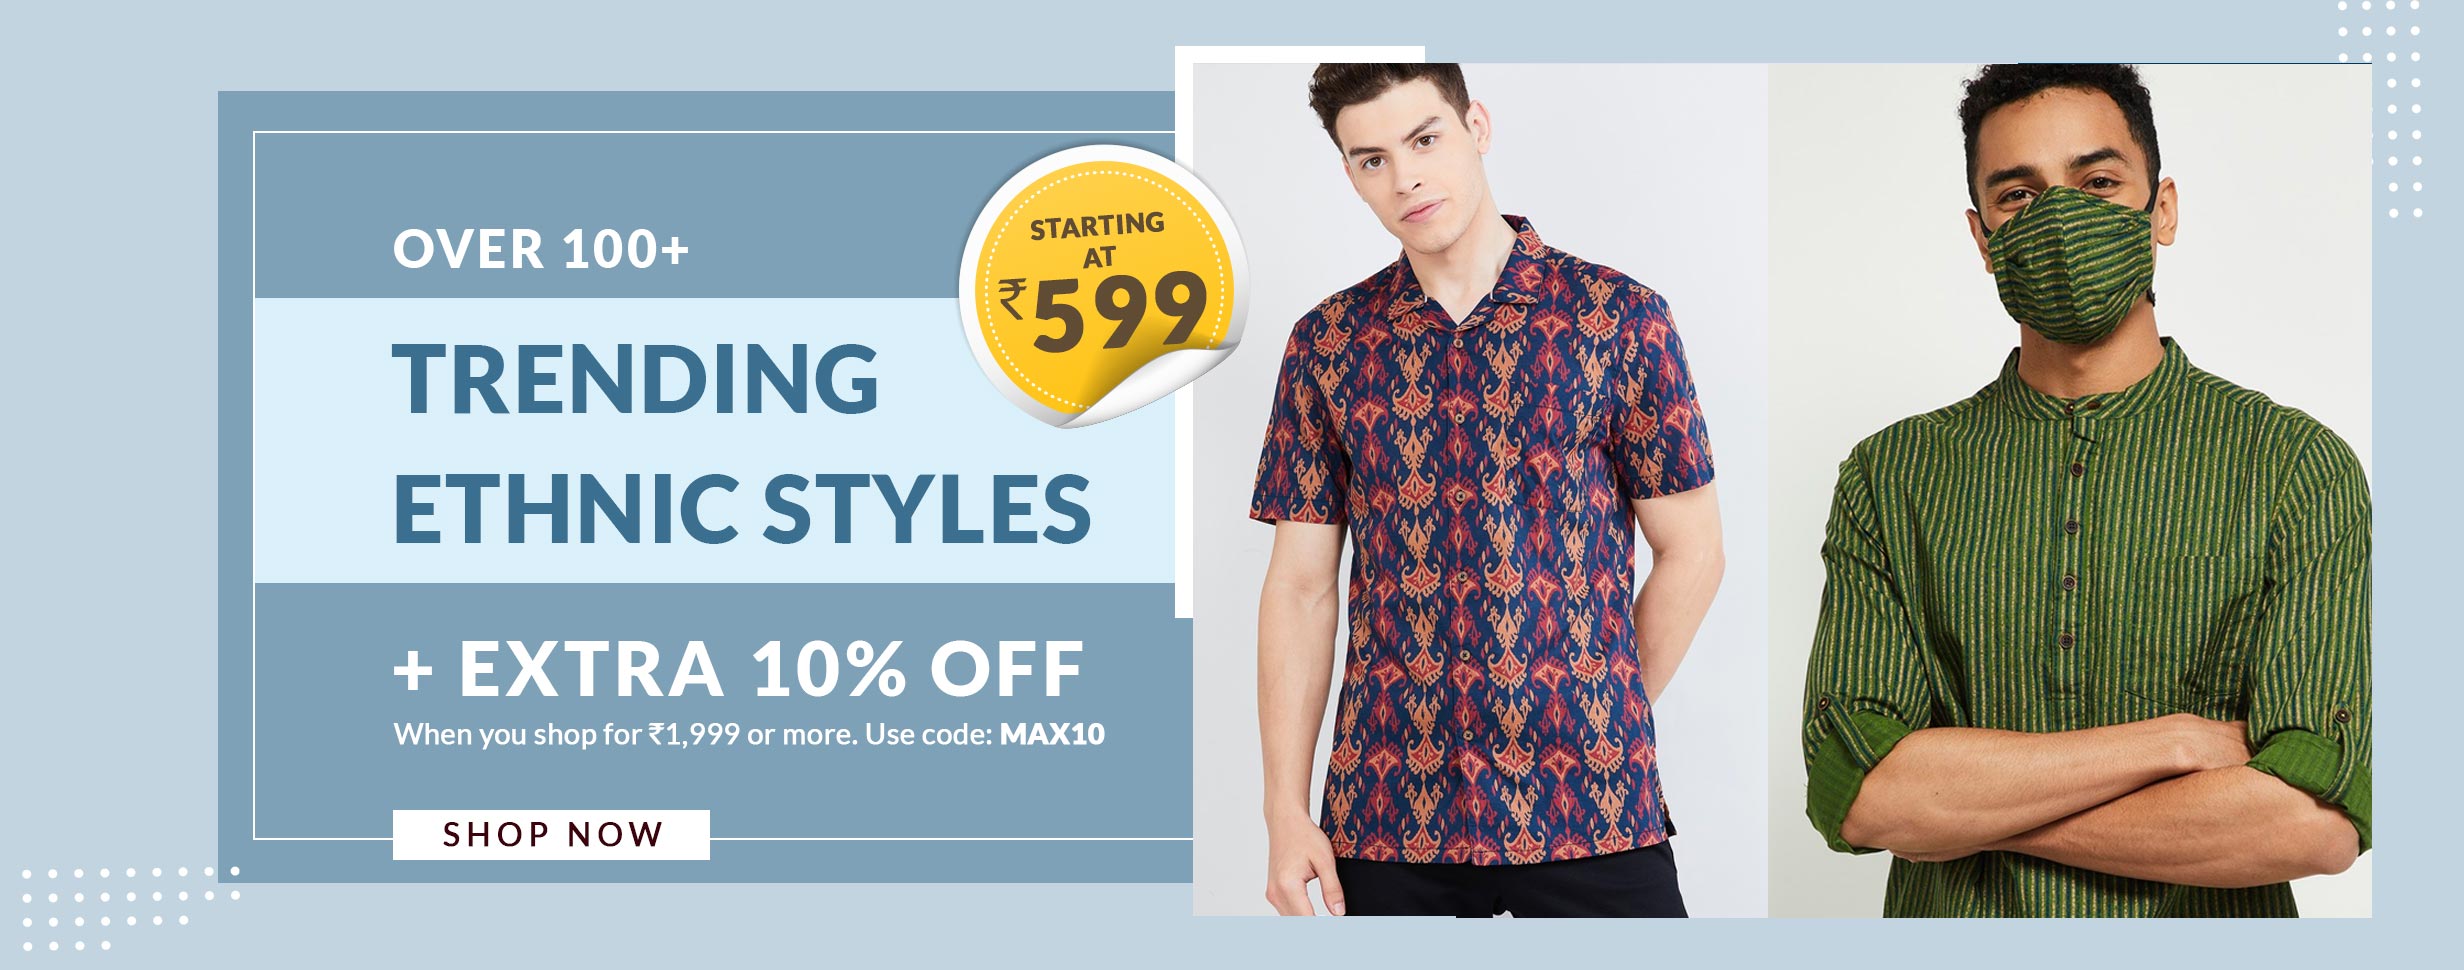 max t shirts price in india